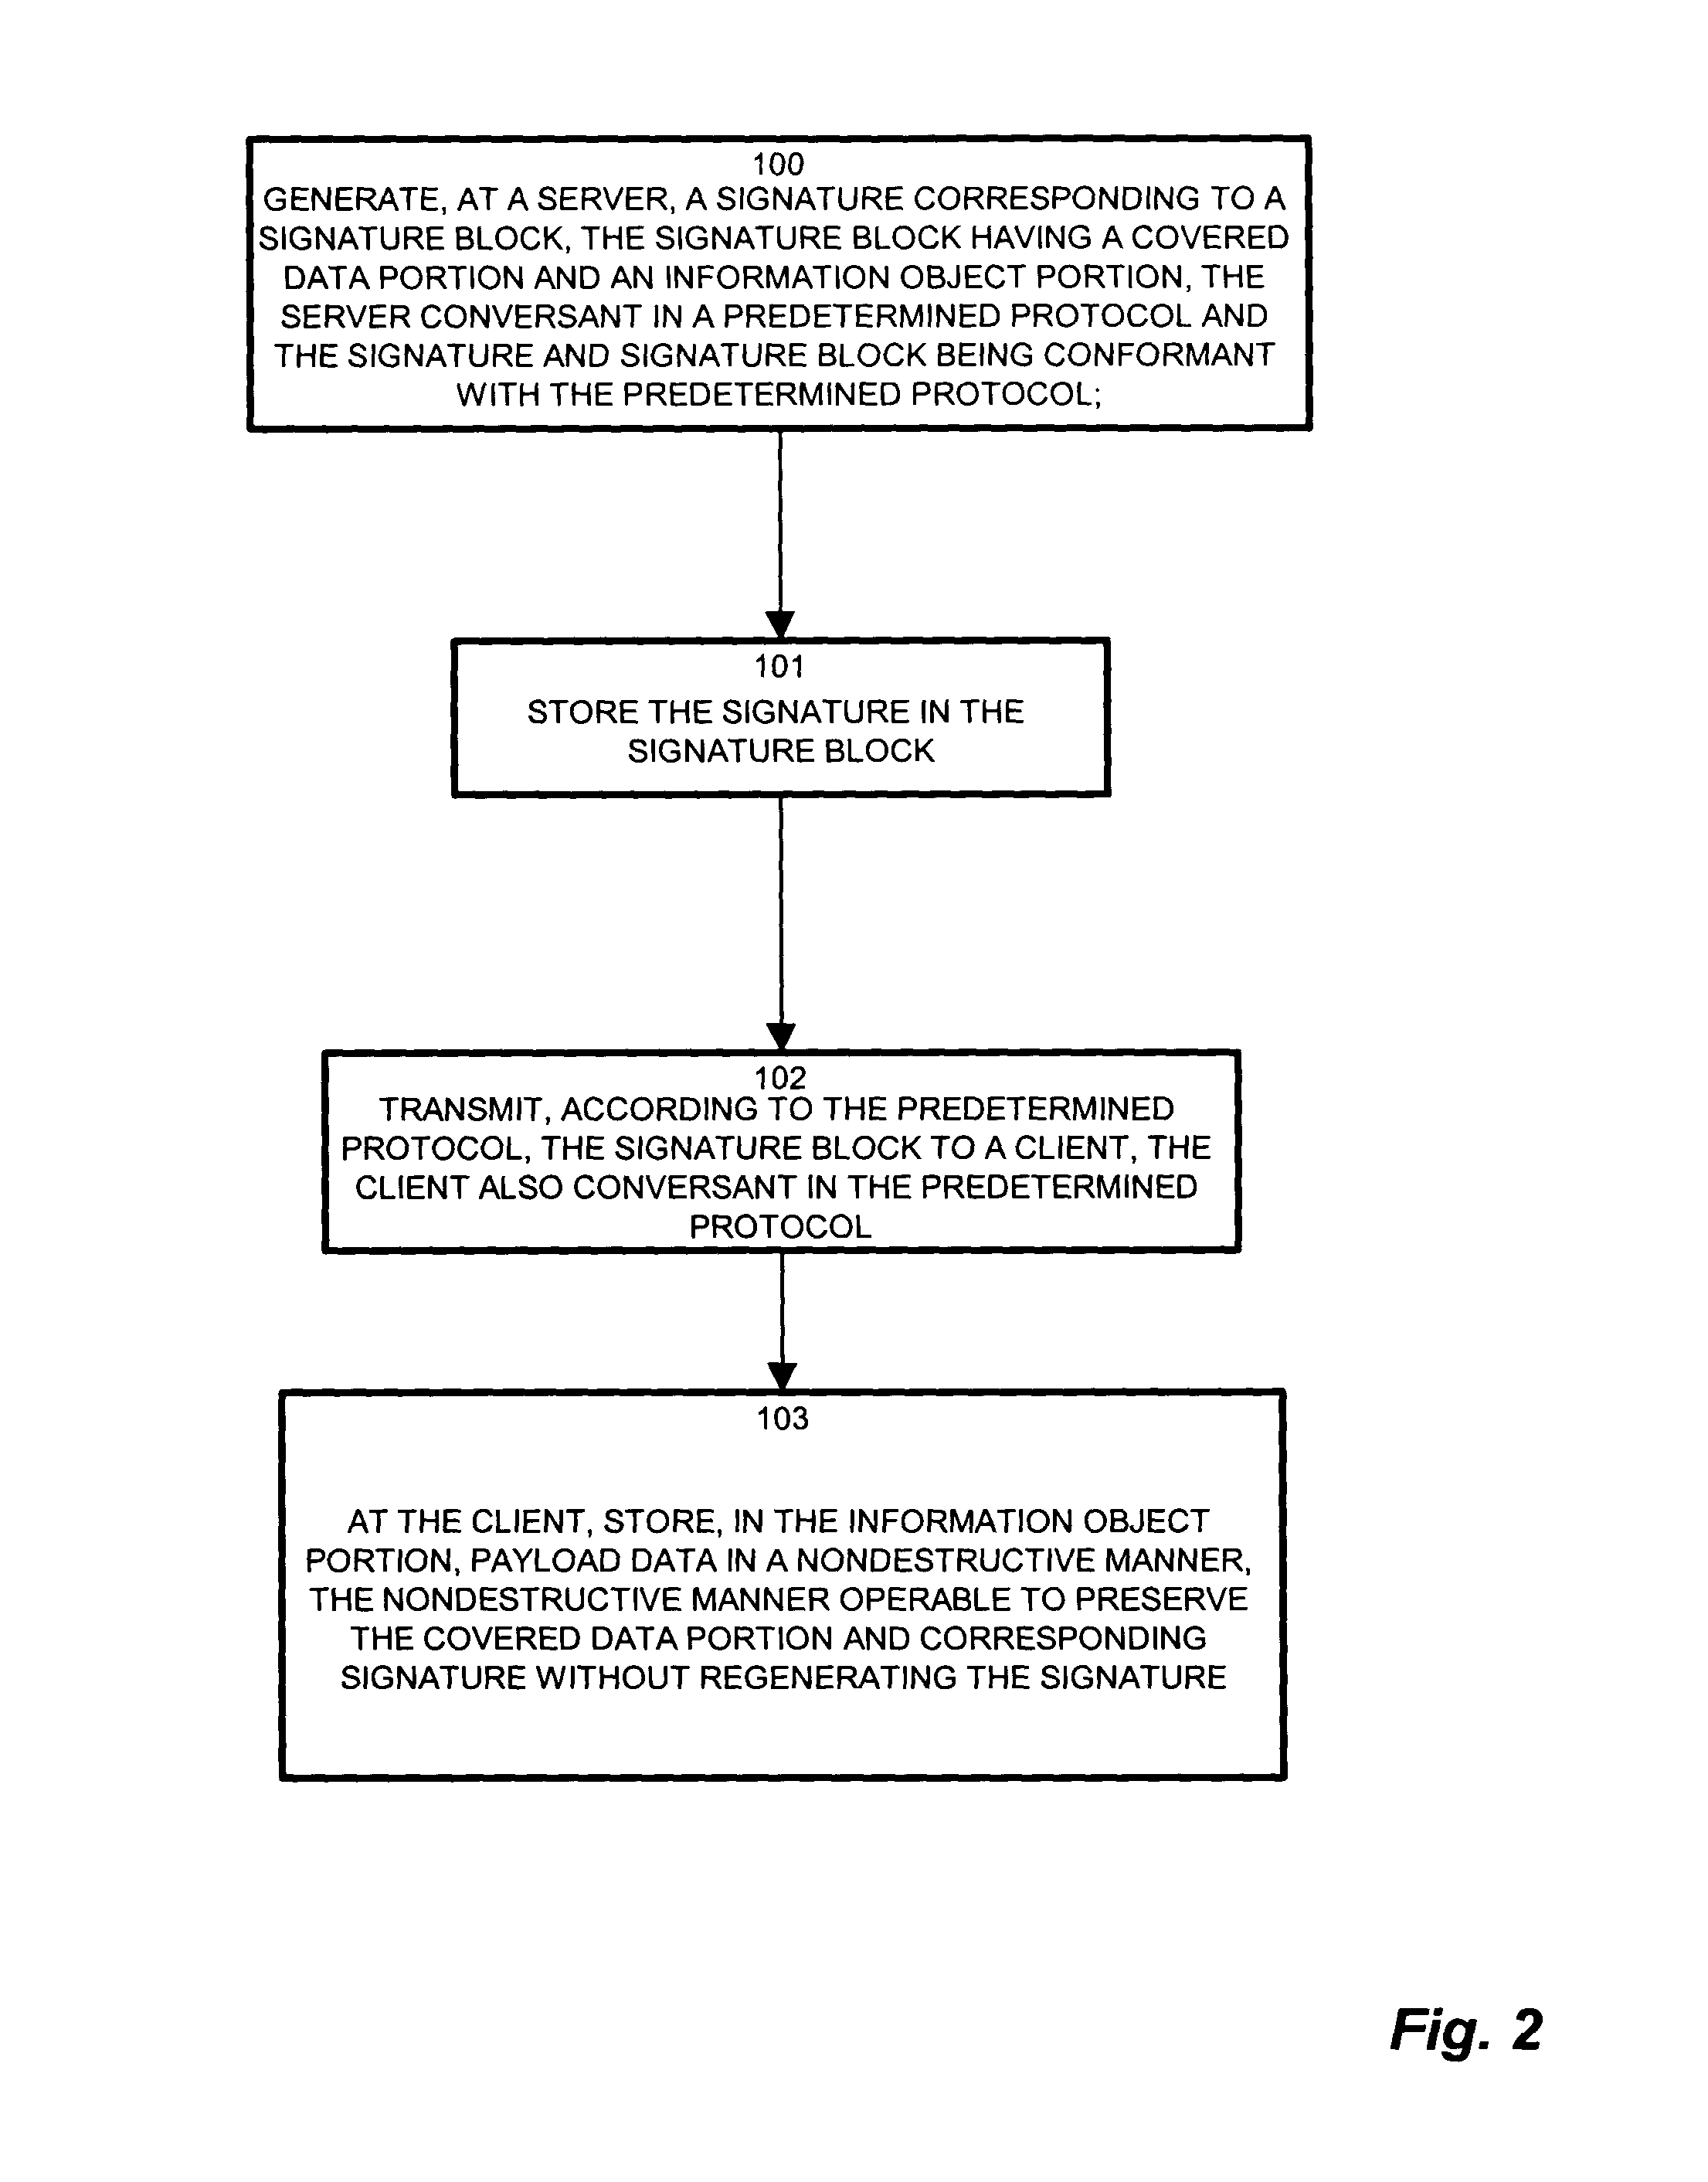 System and methods for using a signature protocol by a nonsigning client